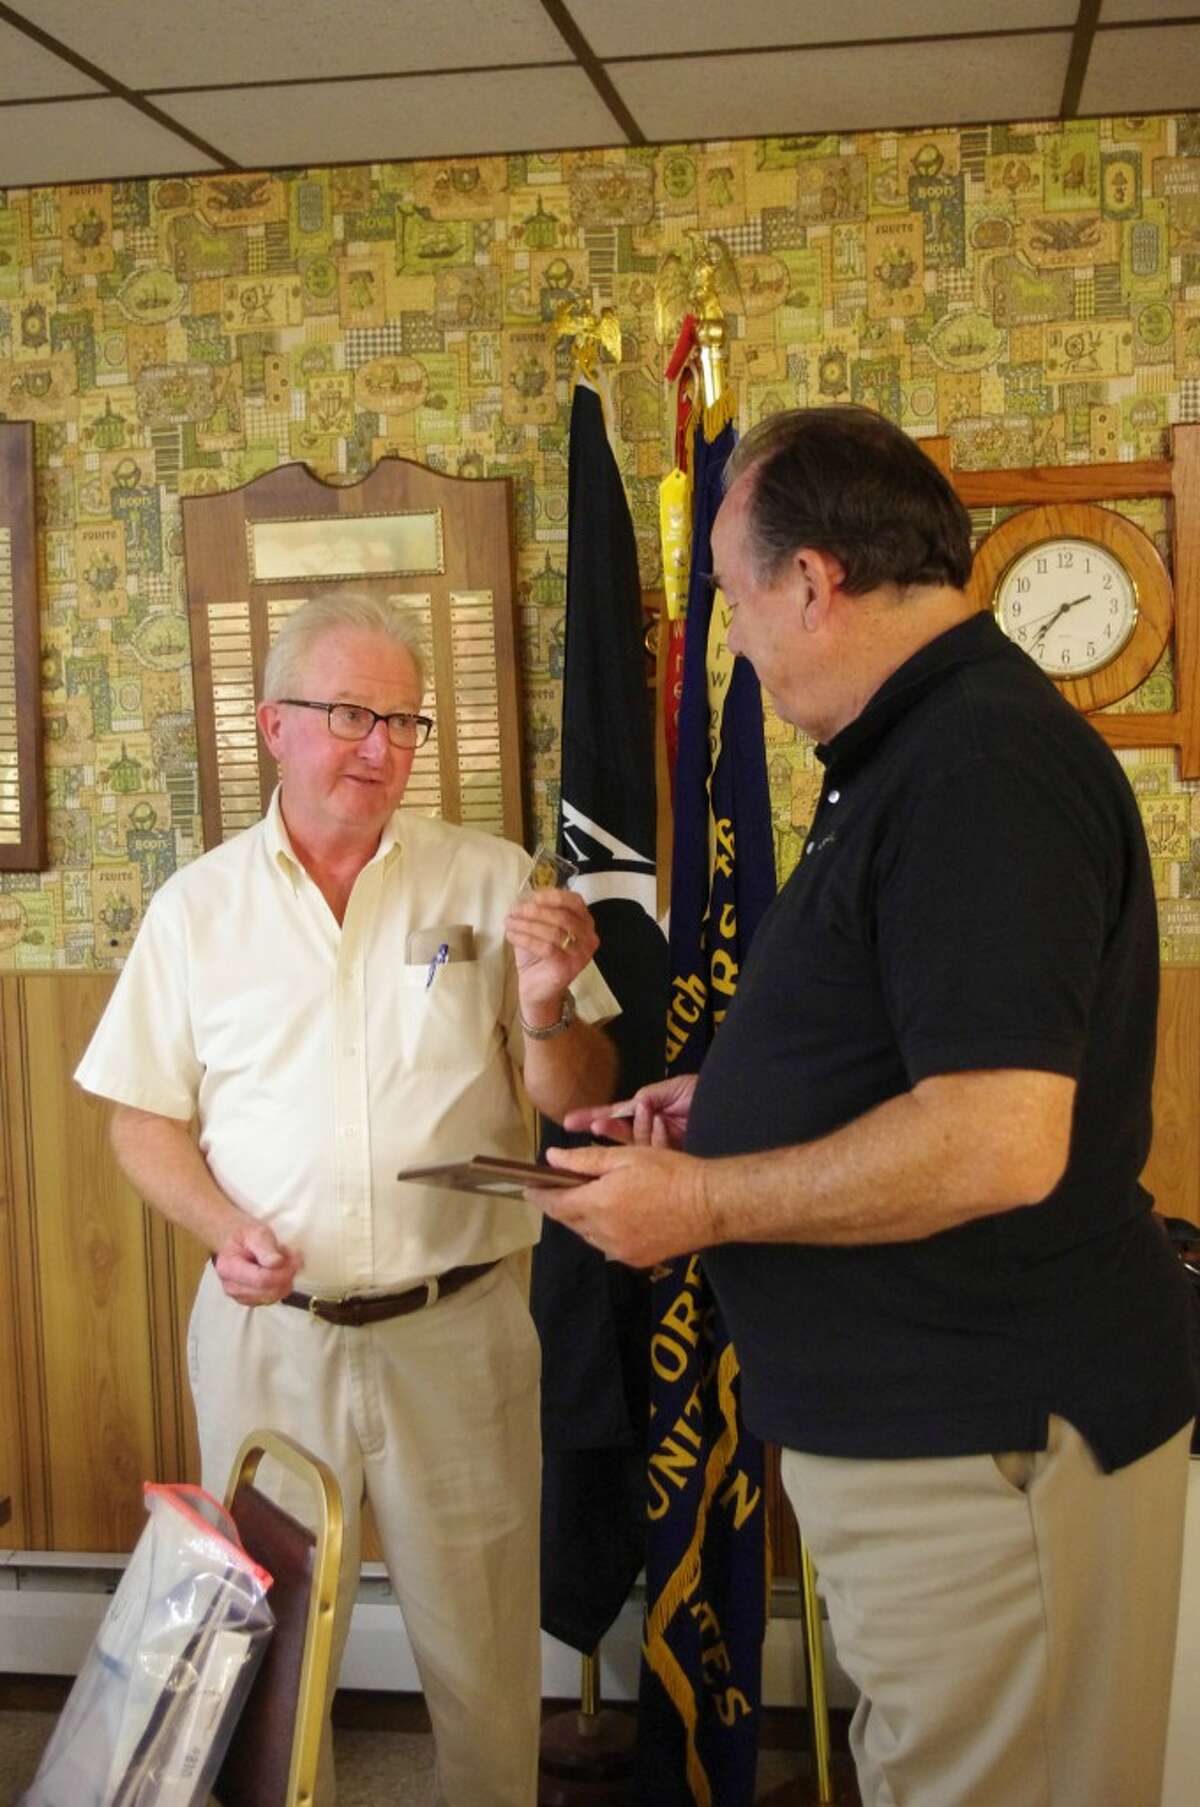 Last week, when he spoke to the United Veterans Council of Manistee County, Jack Beattie (left), a survivor of the 1967 attack on the U.S.S. Liberty, presented a plaque to Ted Arens from the Liberty Veterans Association. Arens was named an honorary crewman of the ship and praised for his "unselfish and exemplary actions in the pursuit of exposing the true story of the June 8, 1967 attack." (Dave Yarnell/News Advocate)